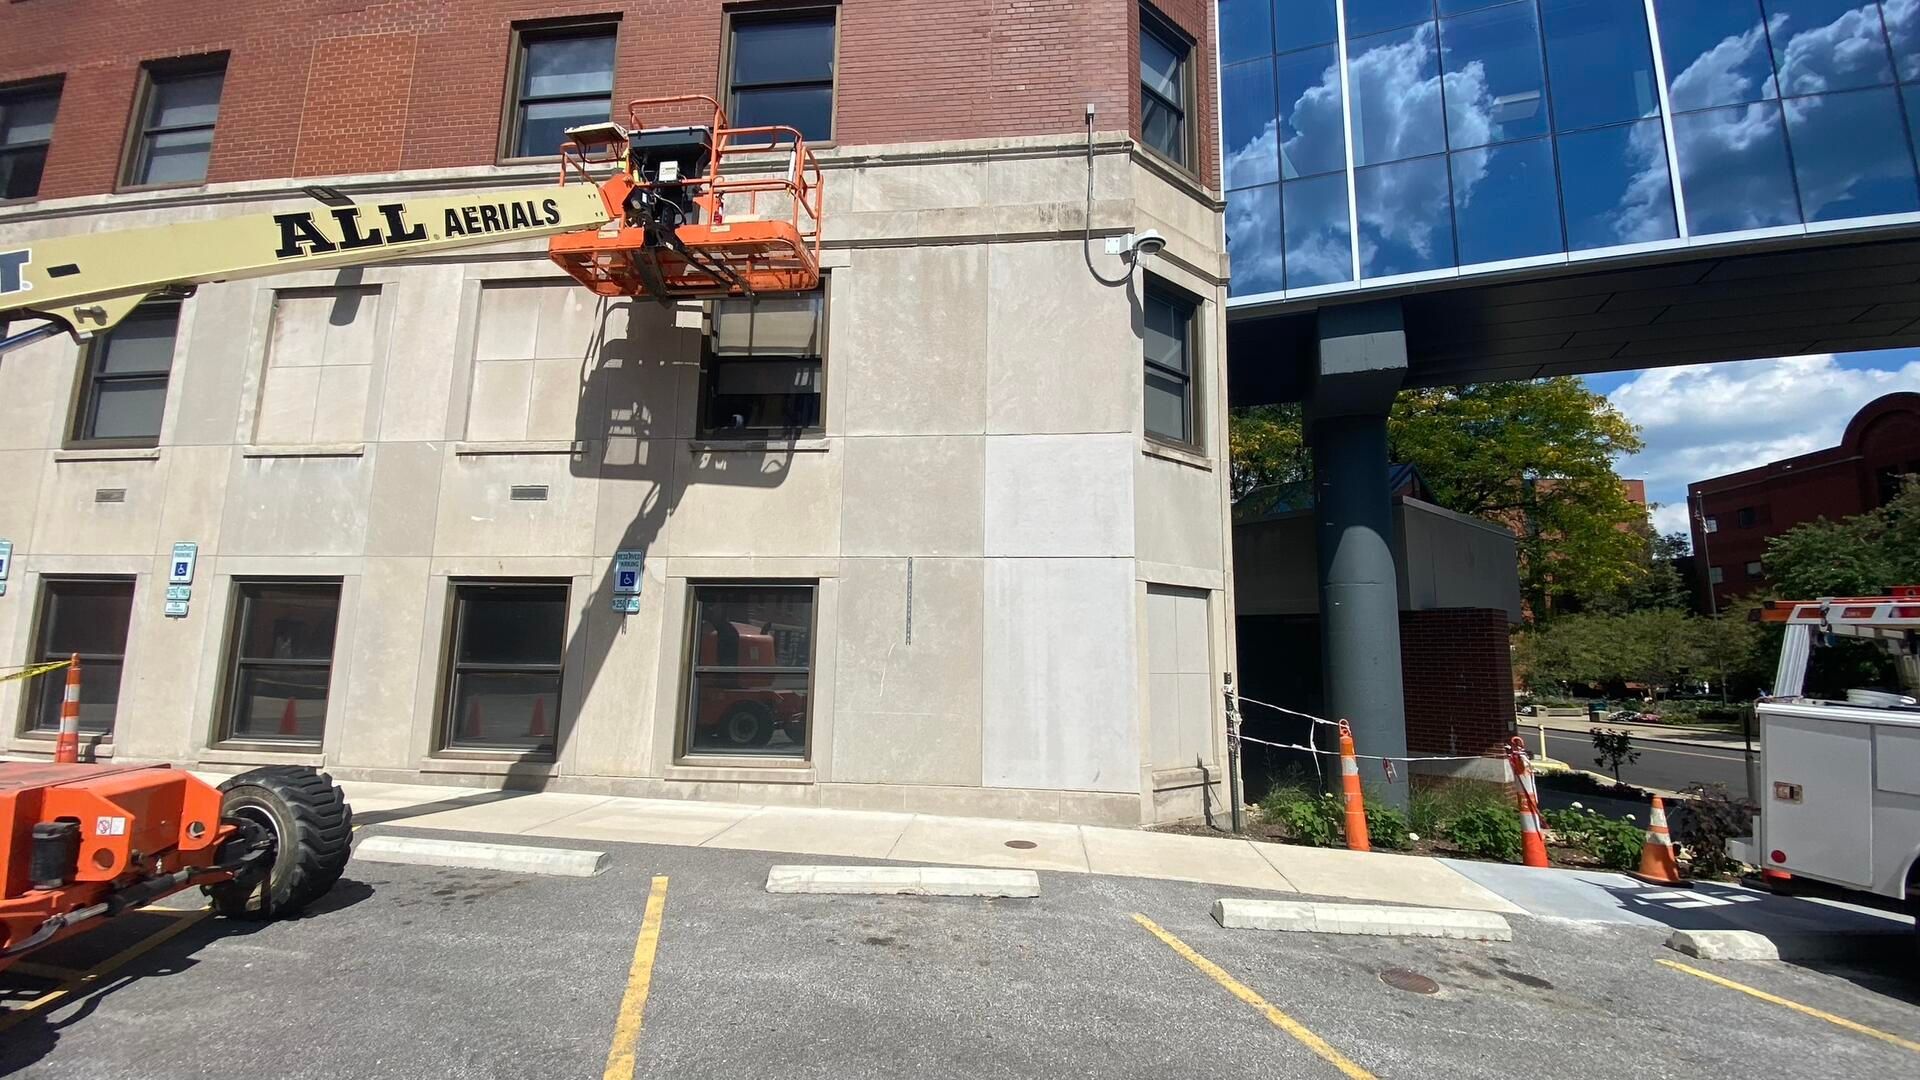 After replacing broken concrete faceade panel at a Hospital in downtown Akron